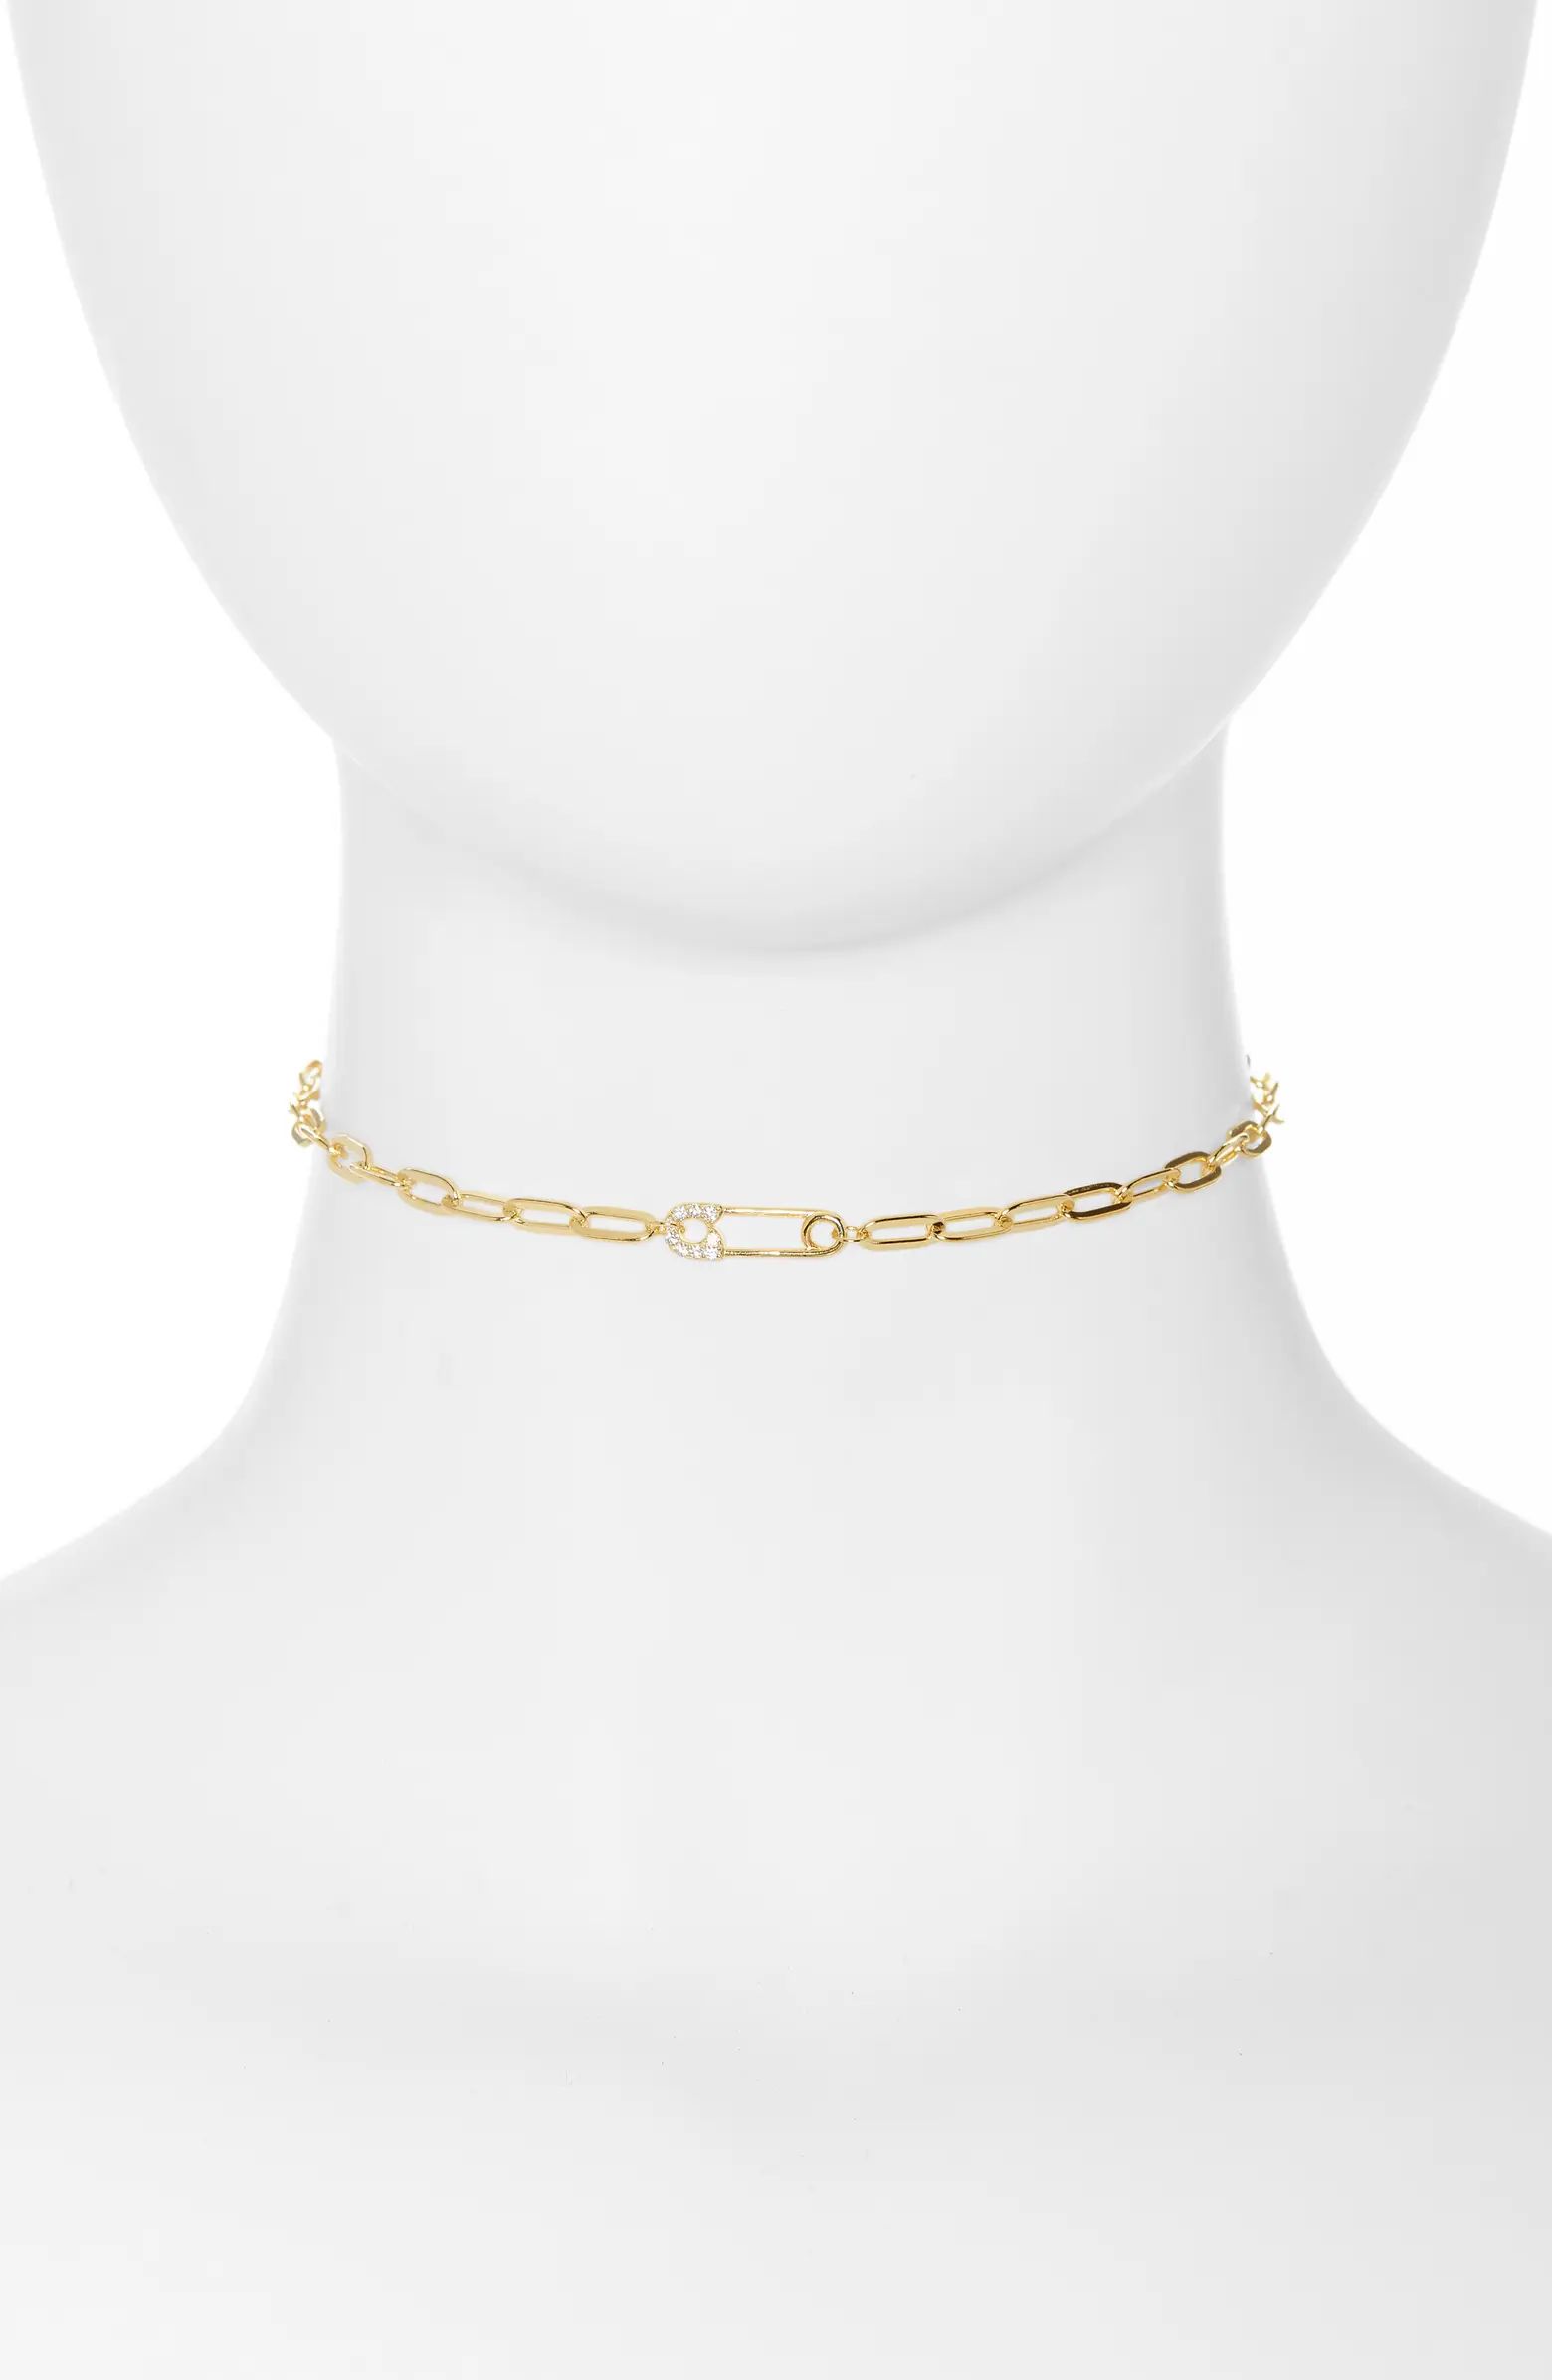 Safety Pin Choker Necklace | Nordstrom